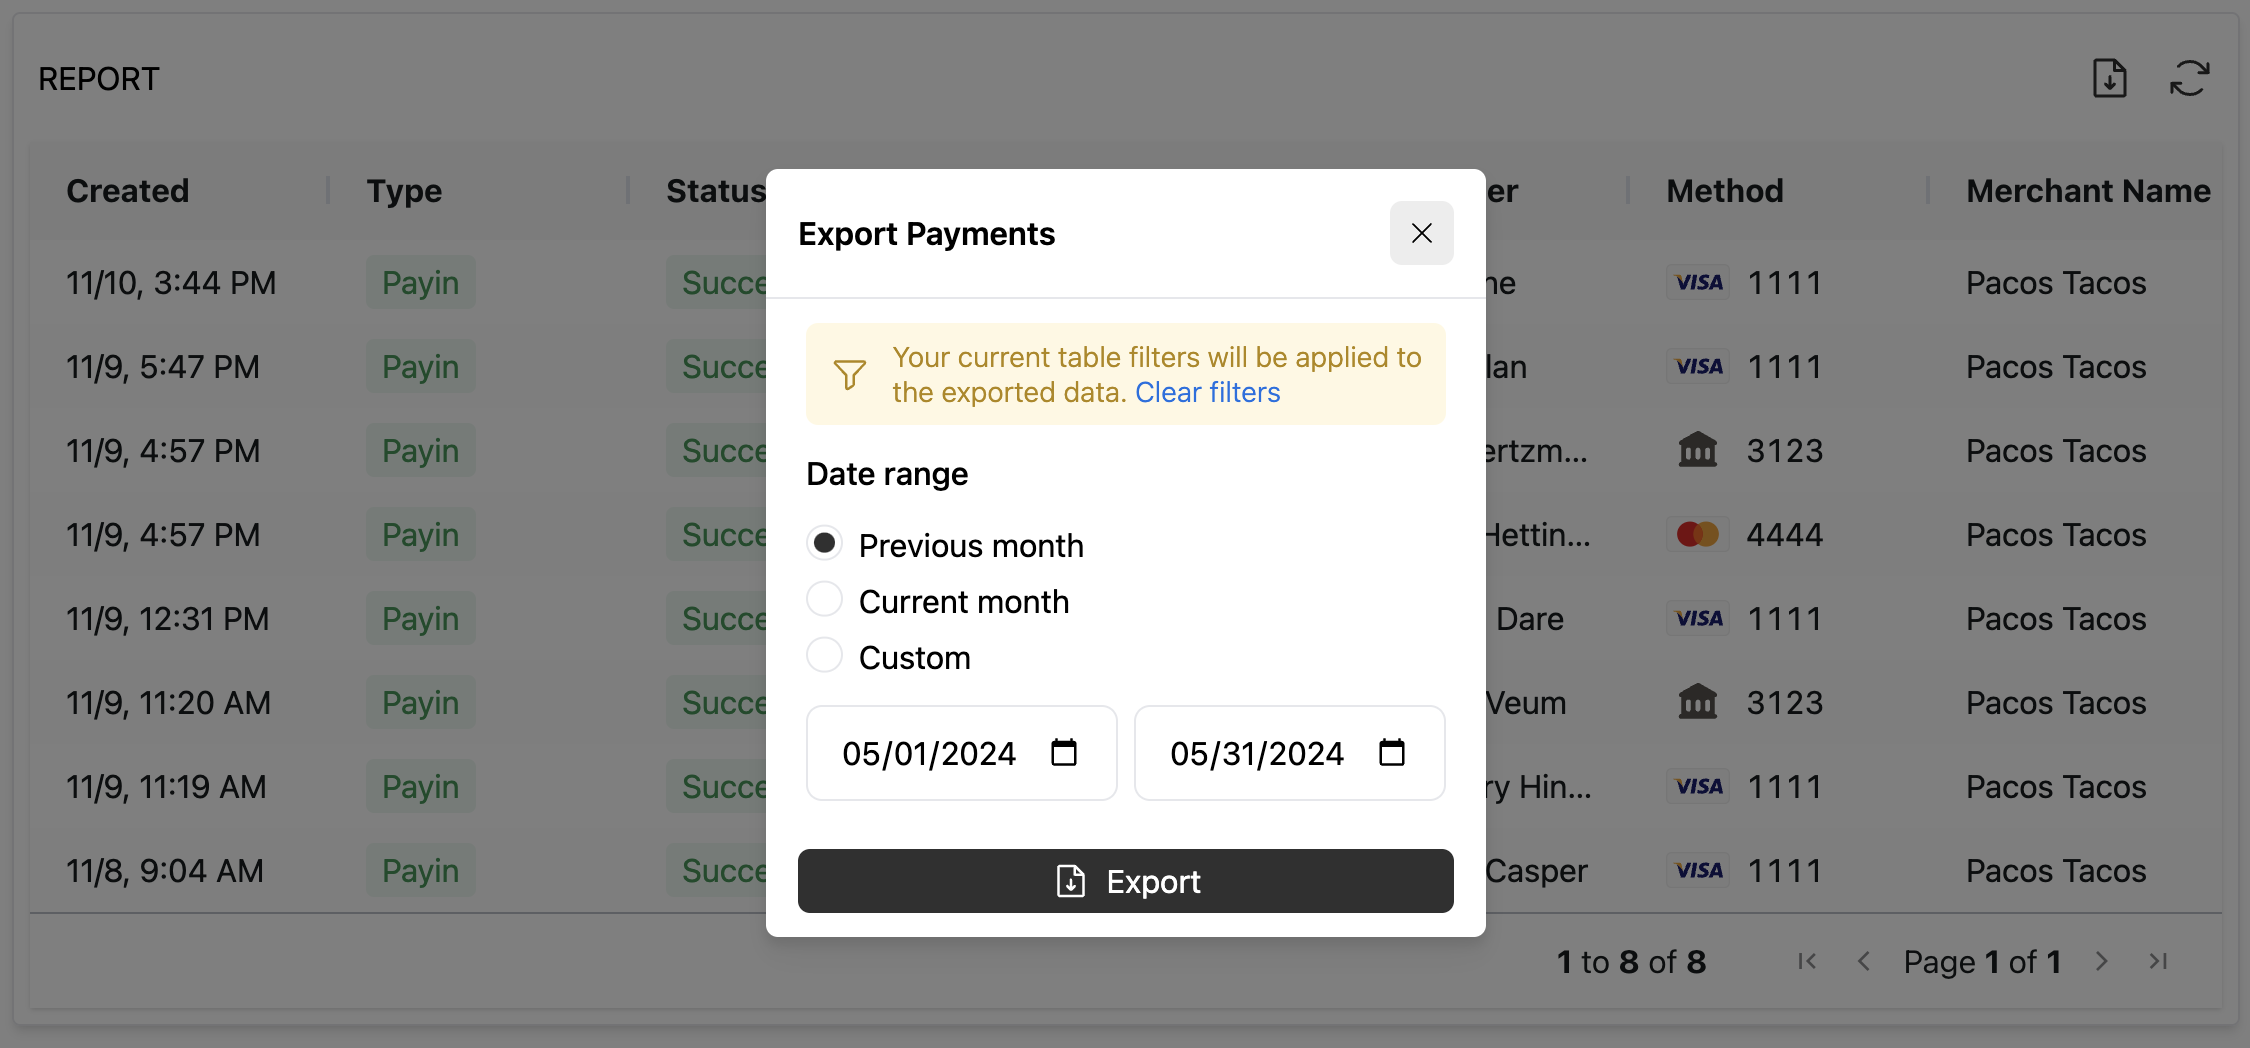 Any filters will be applied to the payment report export